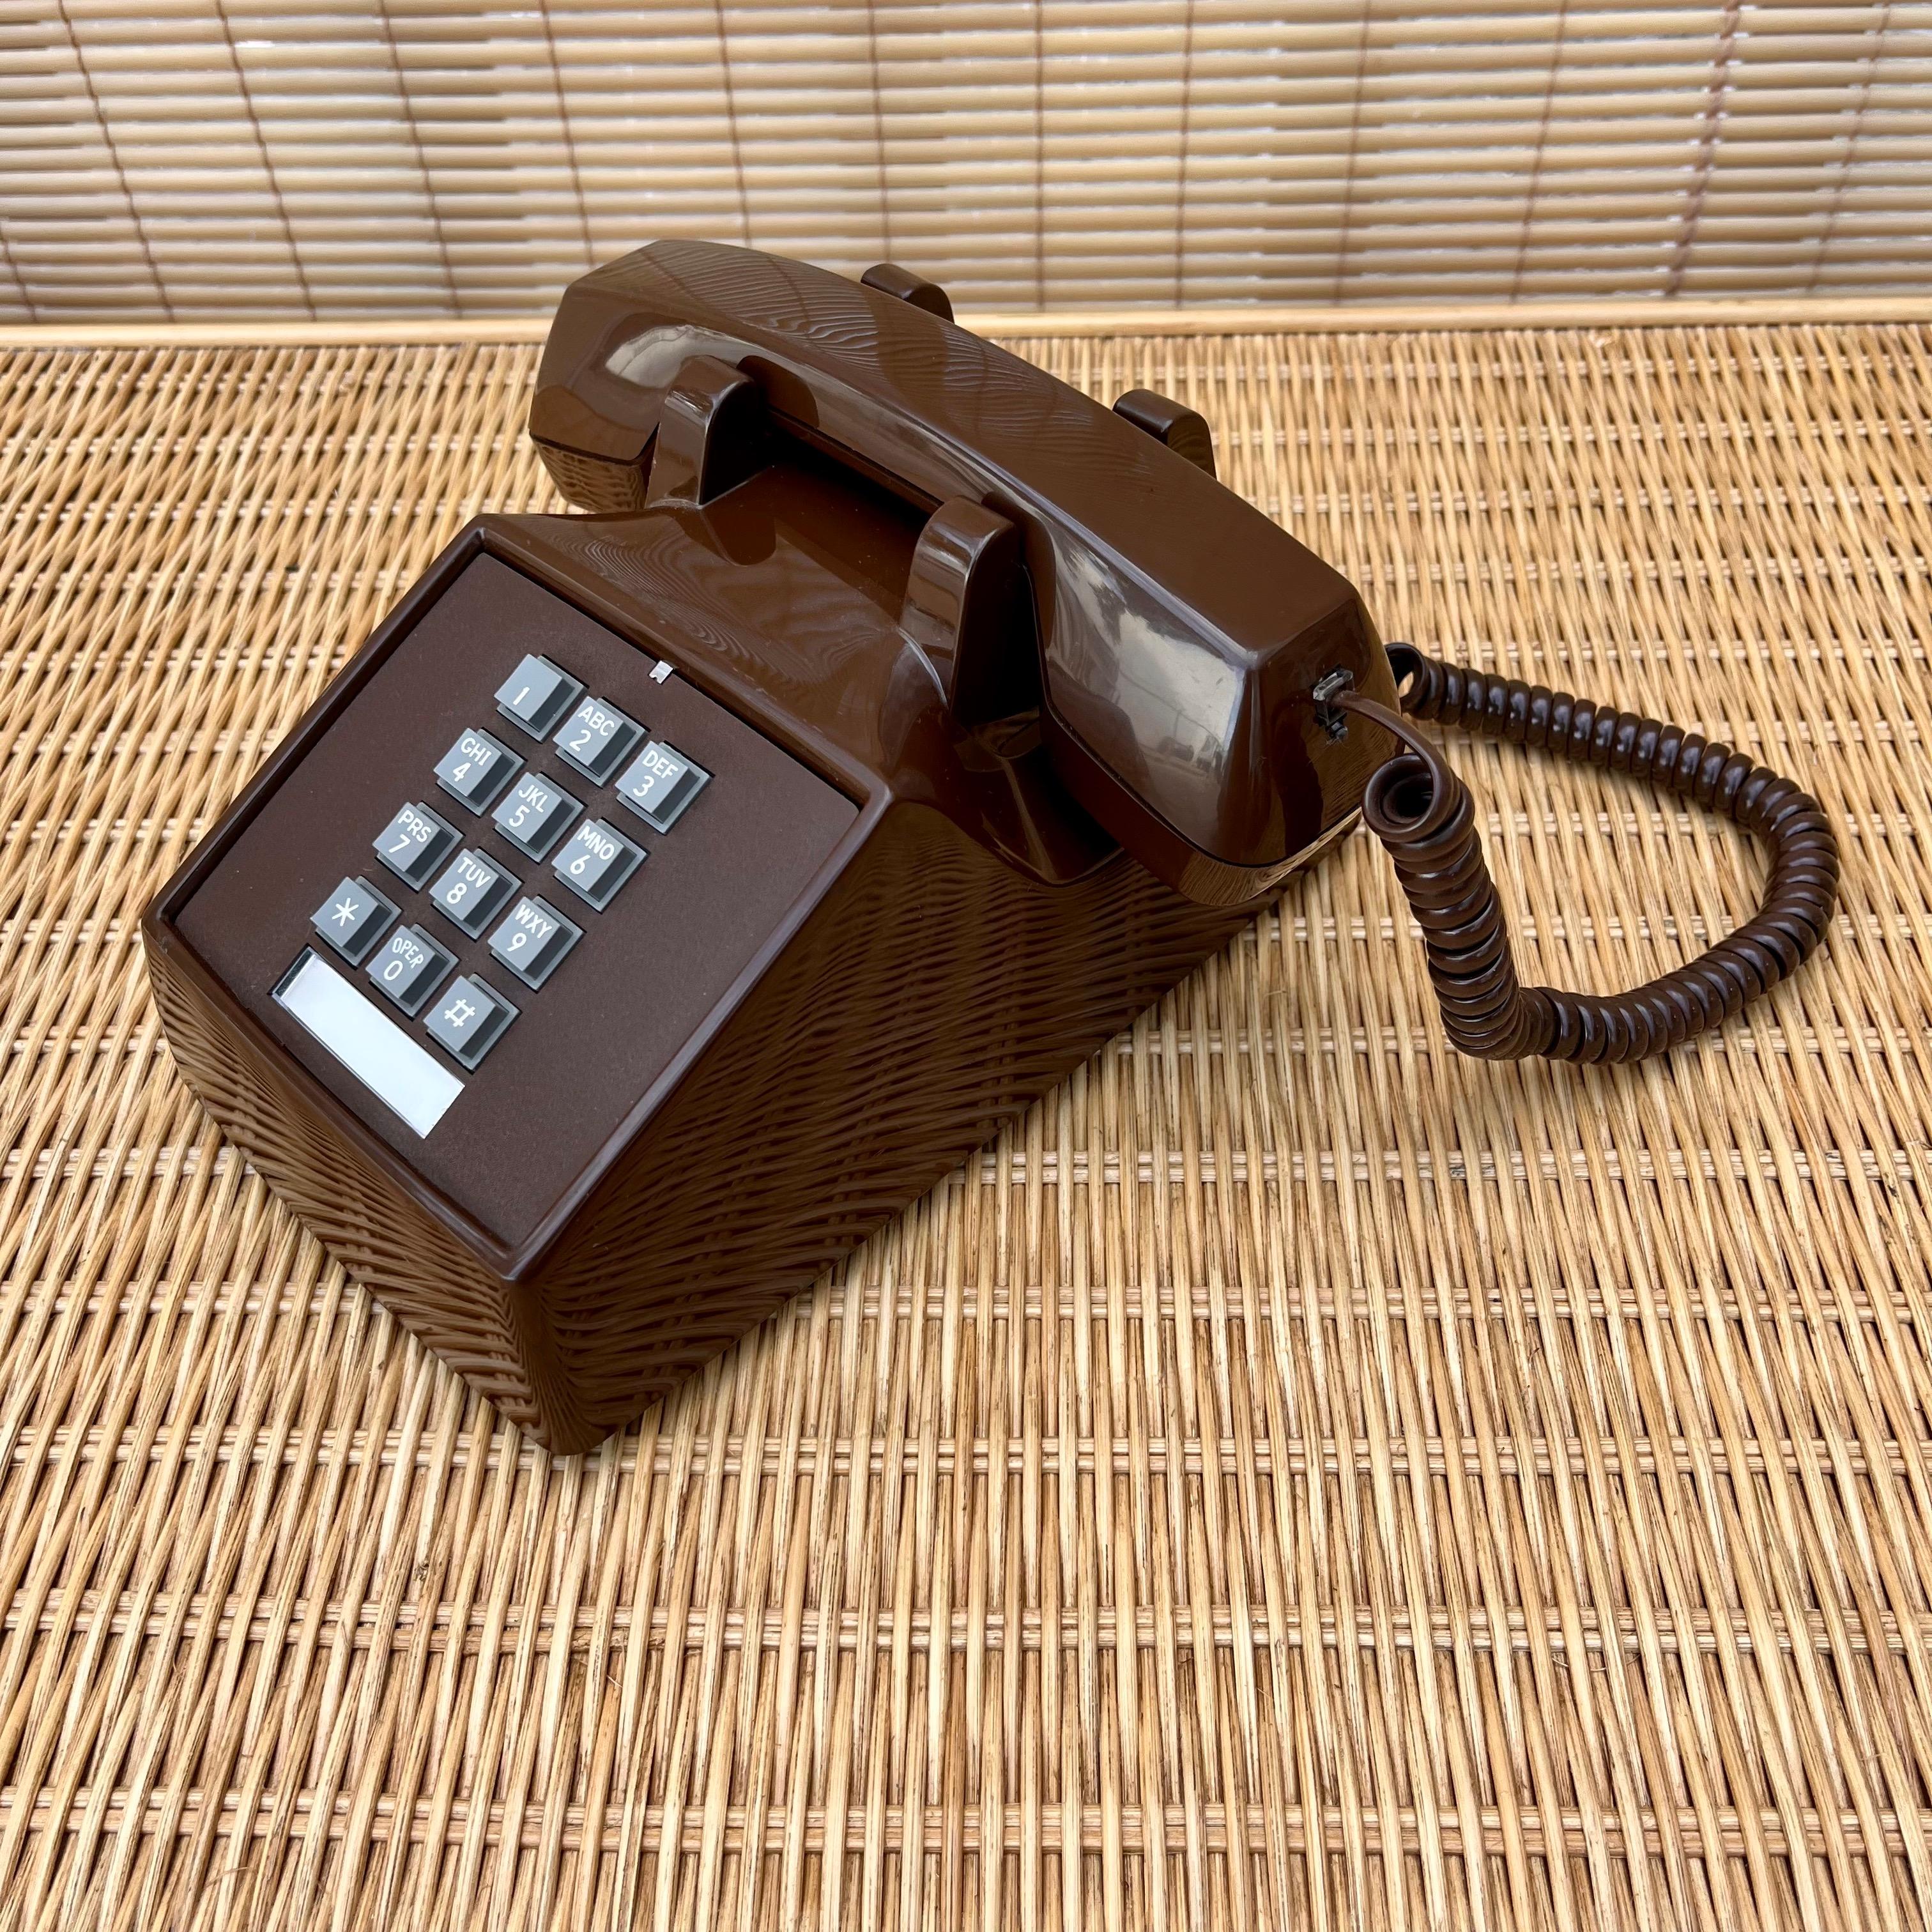 Vintage chocolate brown touchtone desk phone. Circa 1980s
Features a bright chocolate brown body with contrasting gray buttons. 
The base has rubber feet to prevent sliding.
The original line cord (that plugs into the jack) is also included. 
In